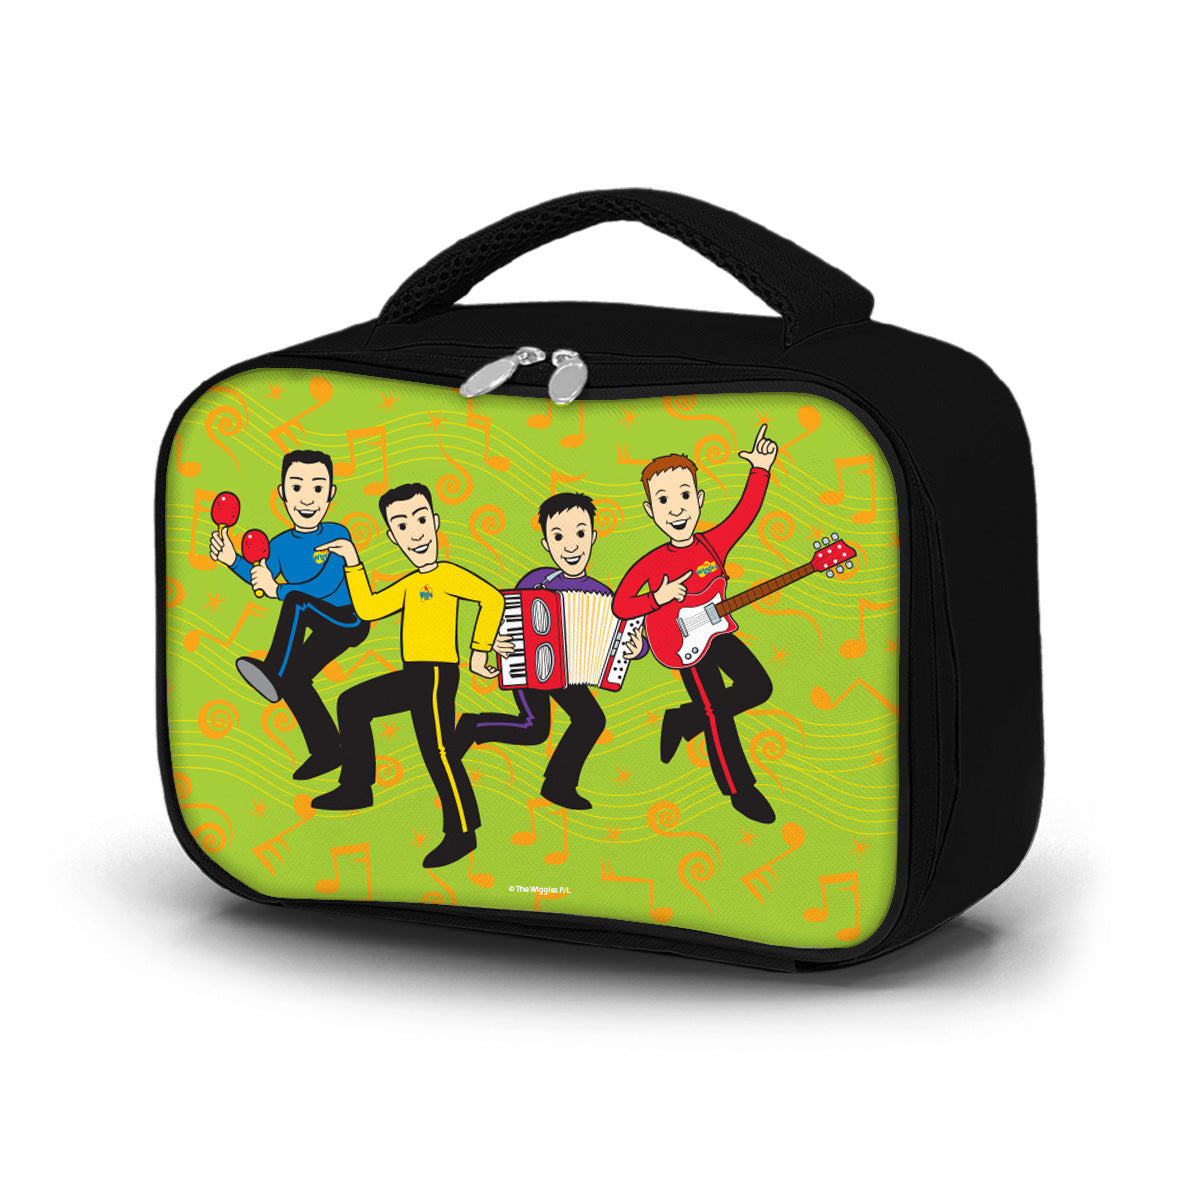 The Wiggles Original Performance Lunch Cooler